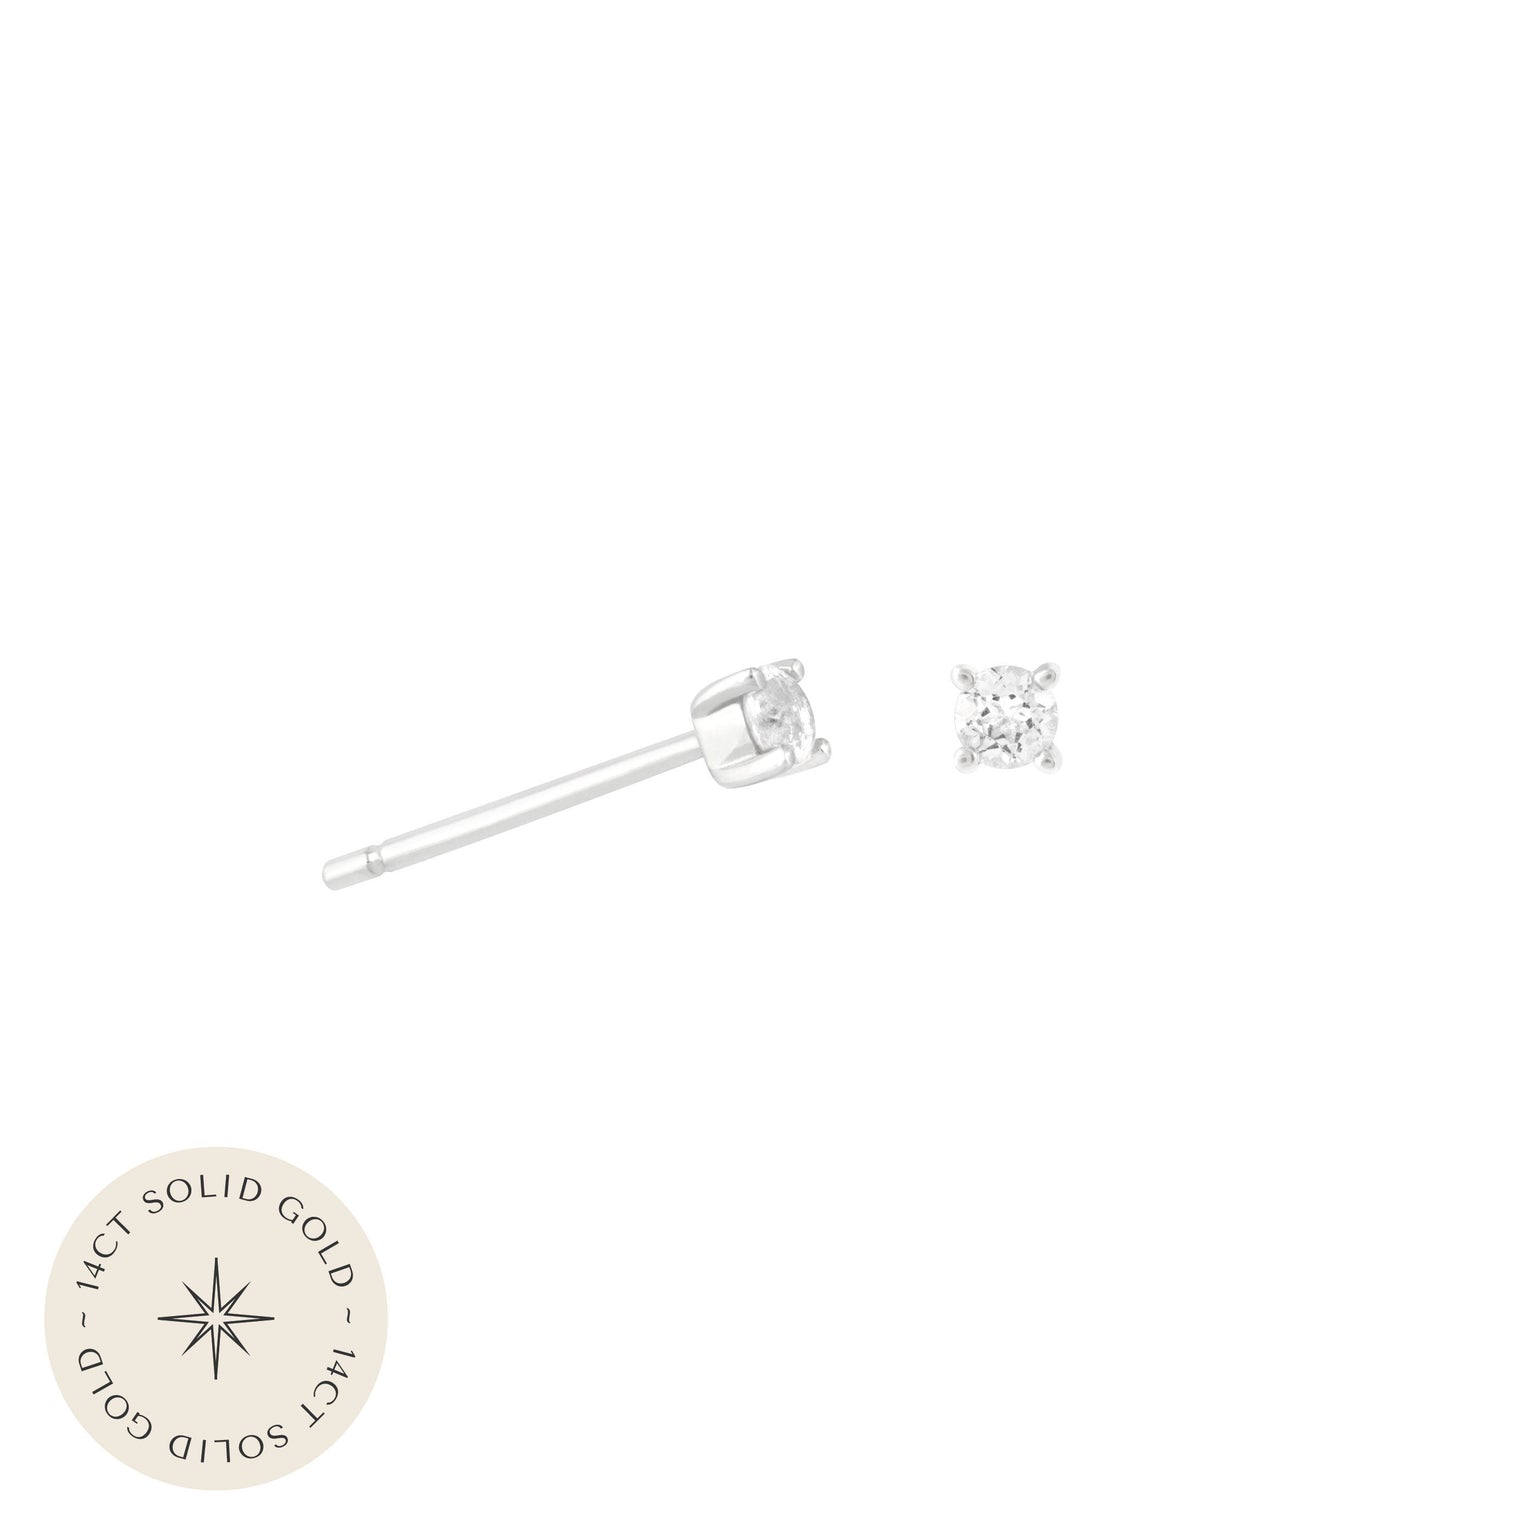 Topaz Stud Earrings in Solid White Gold with 14CT solid gold label